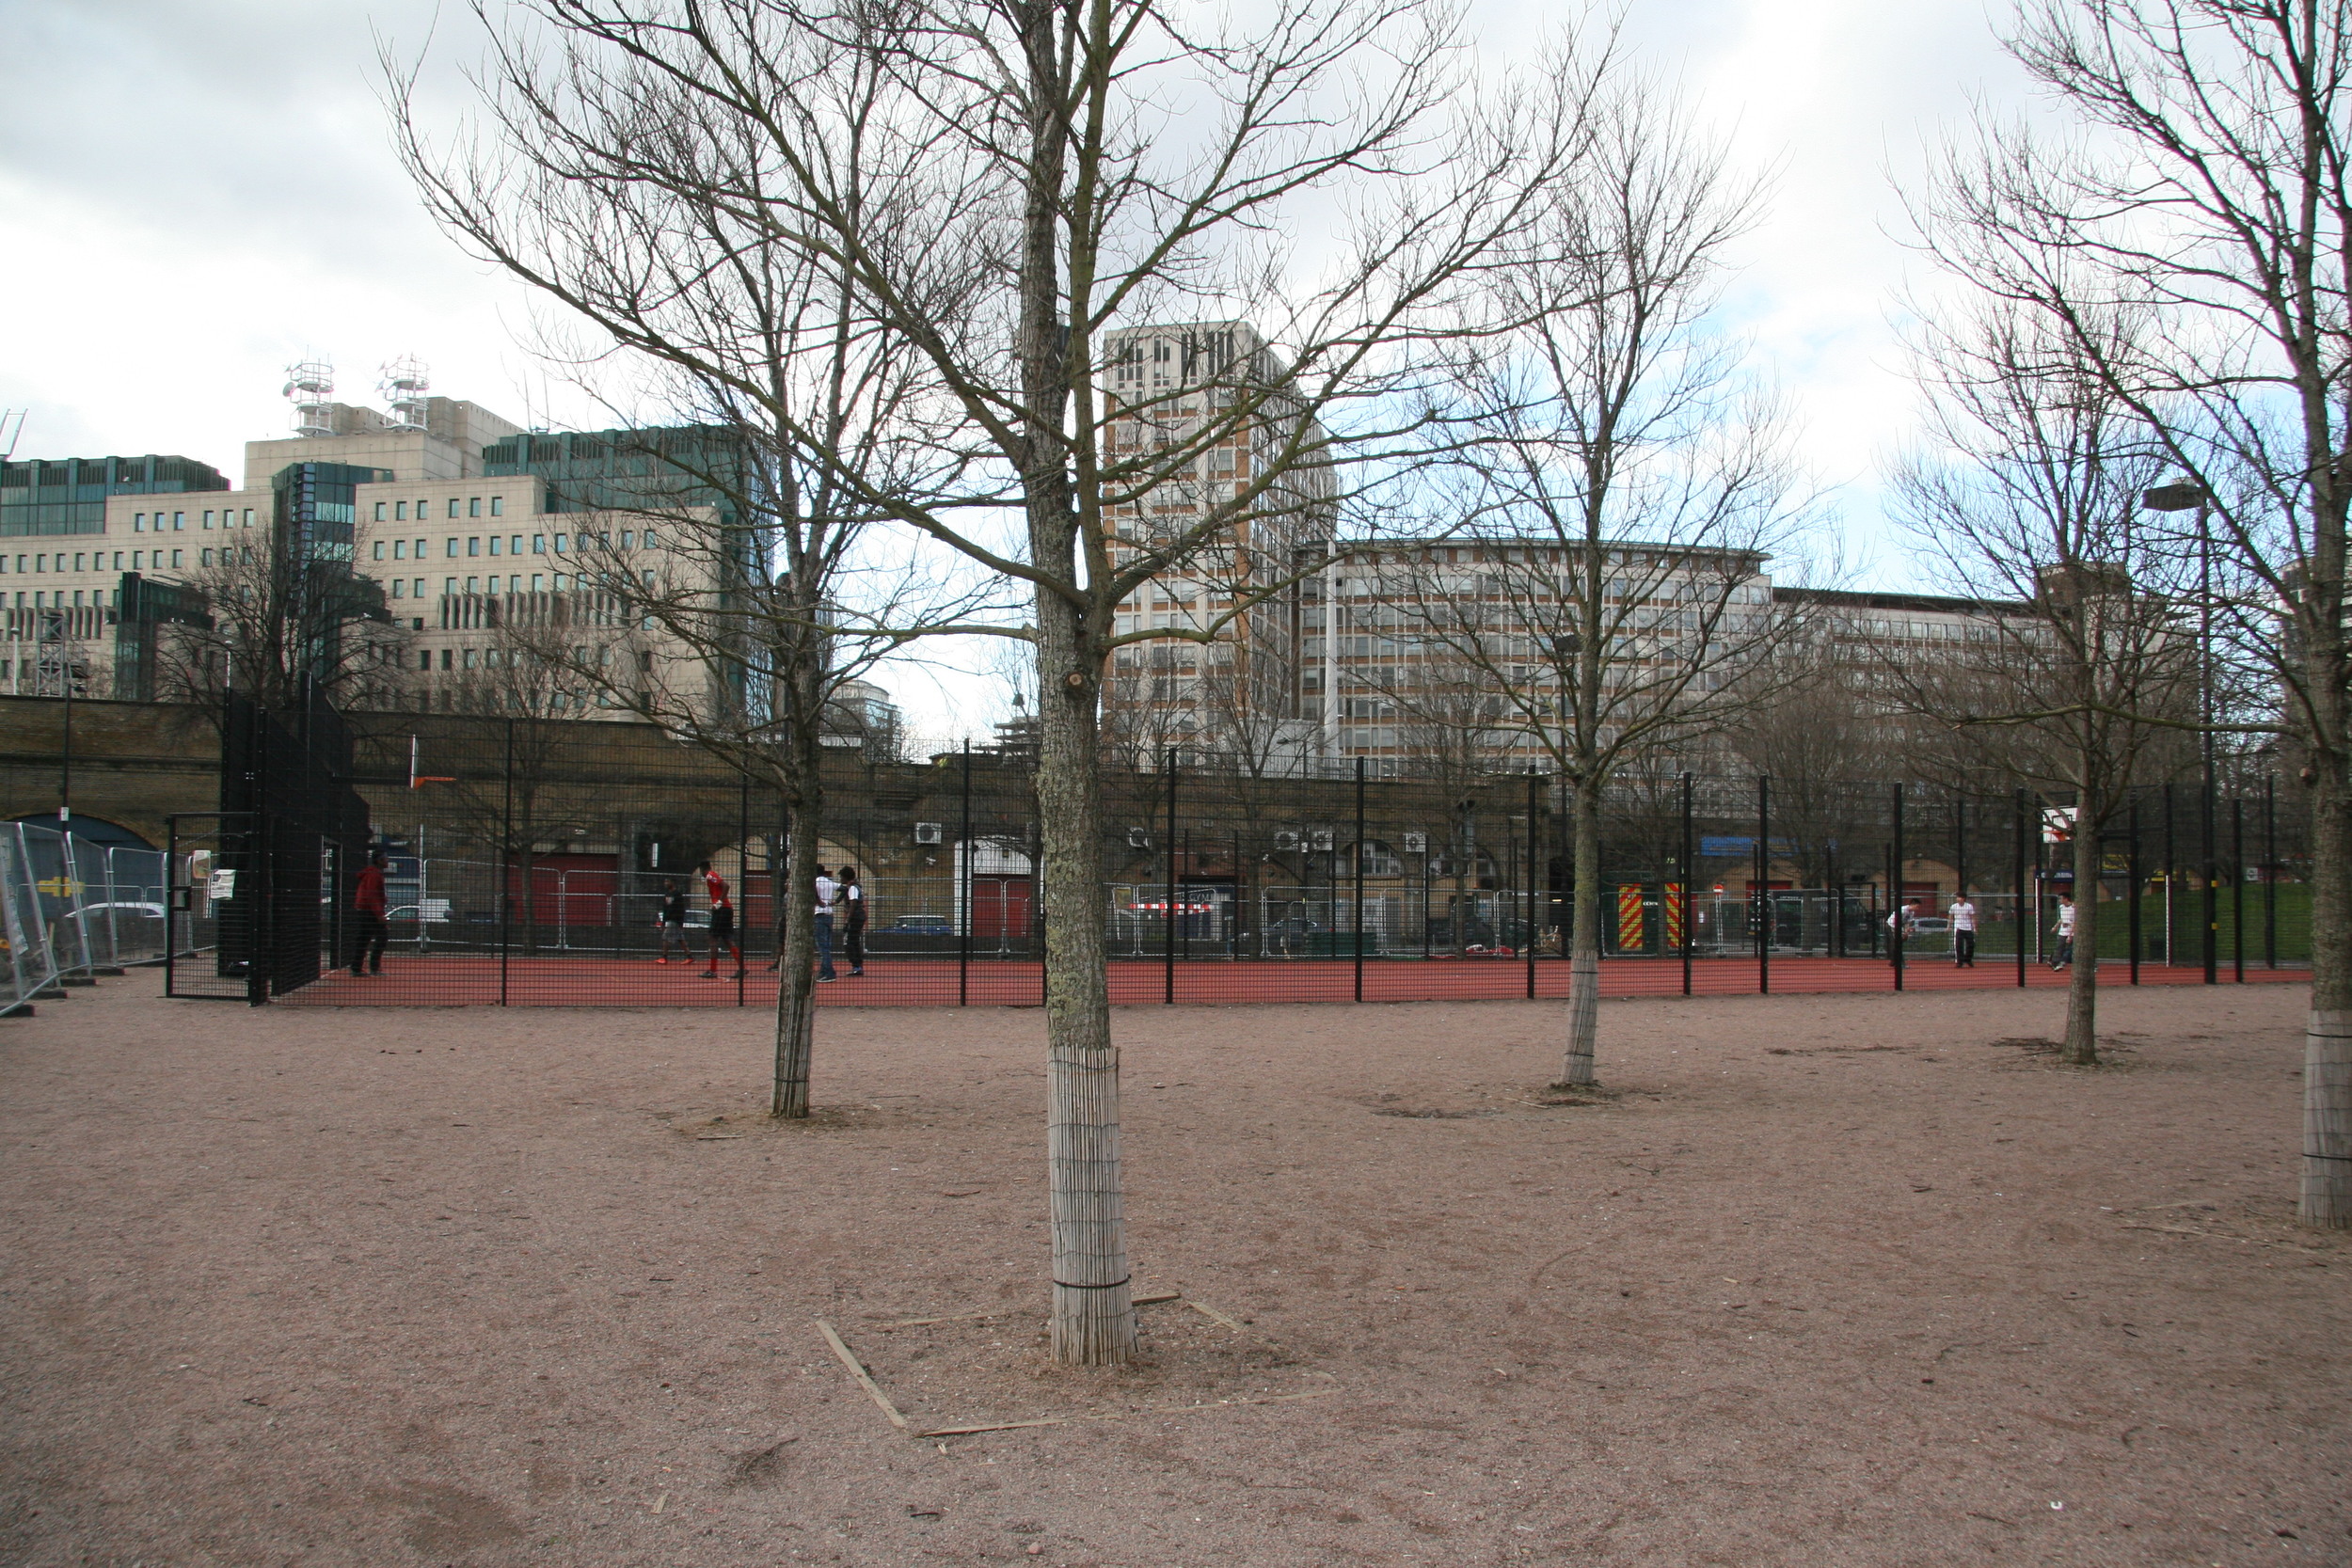 The Elm Square and Multi Use Games Area (2010)